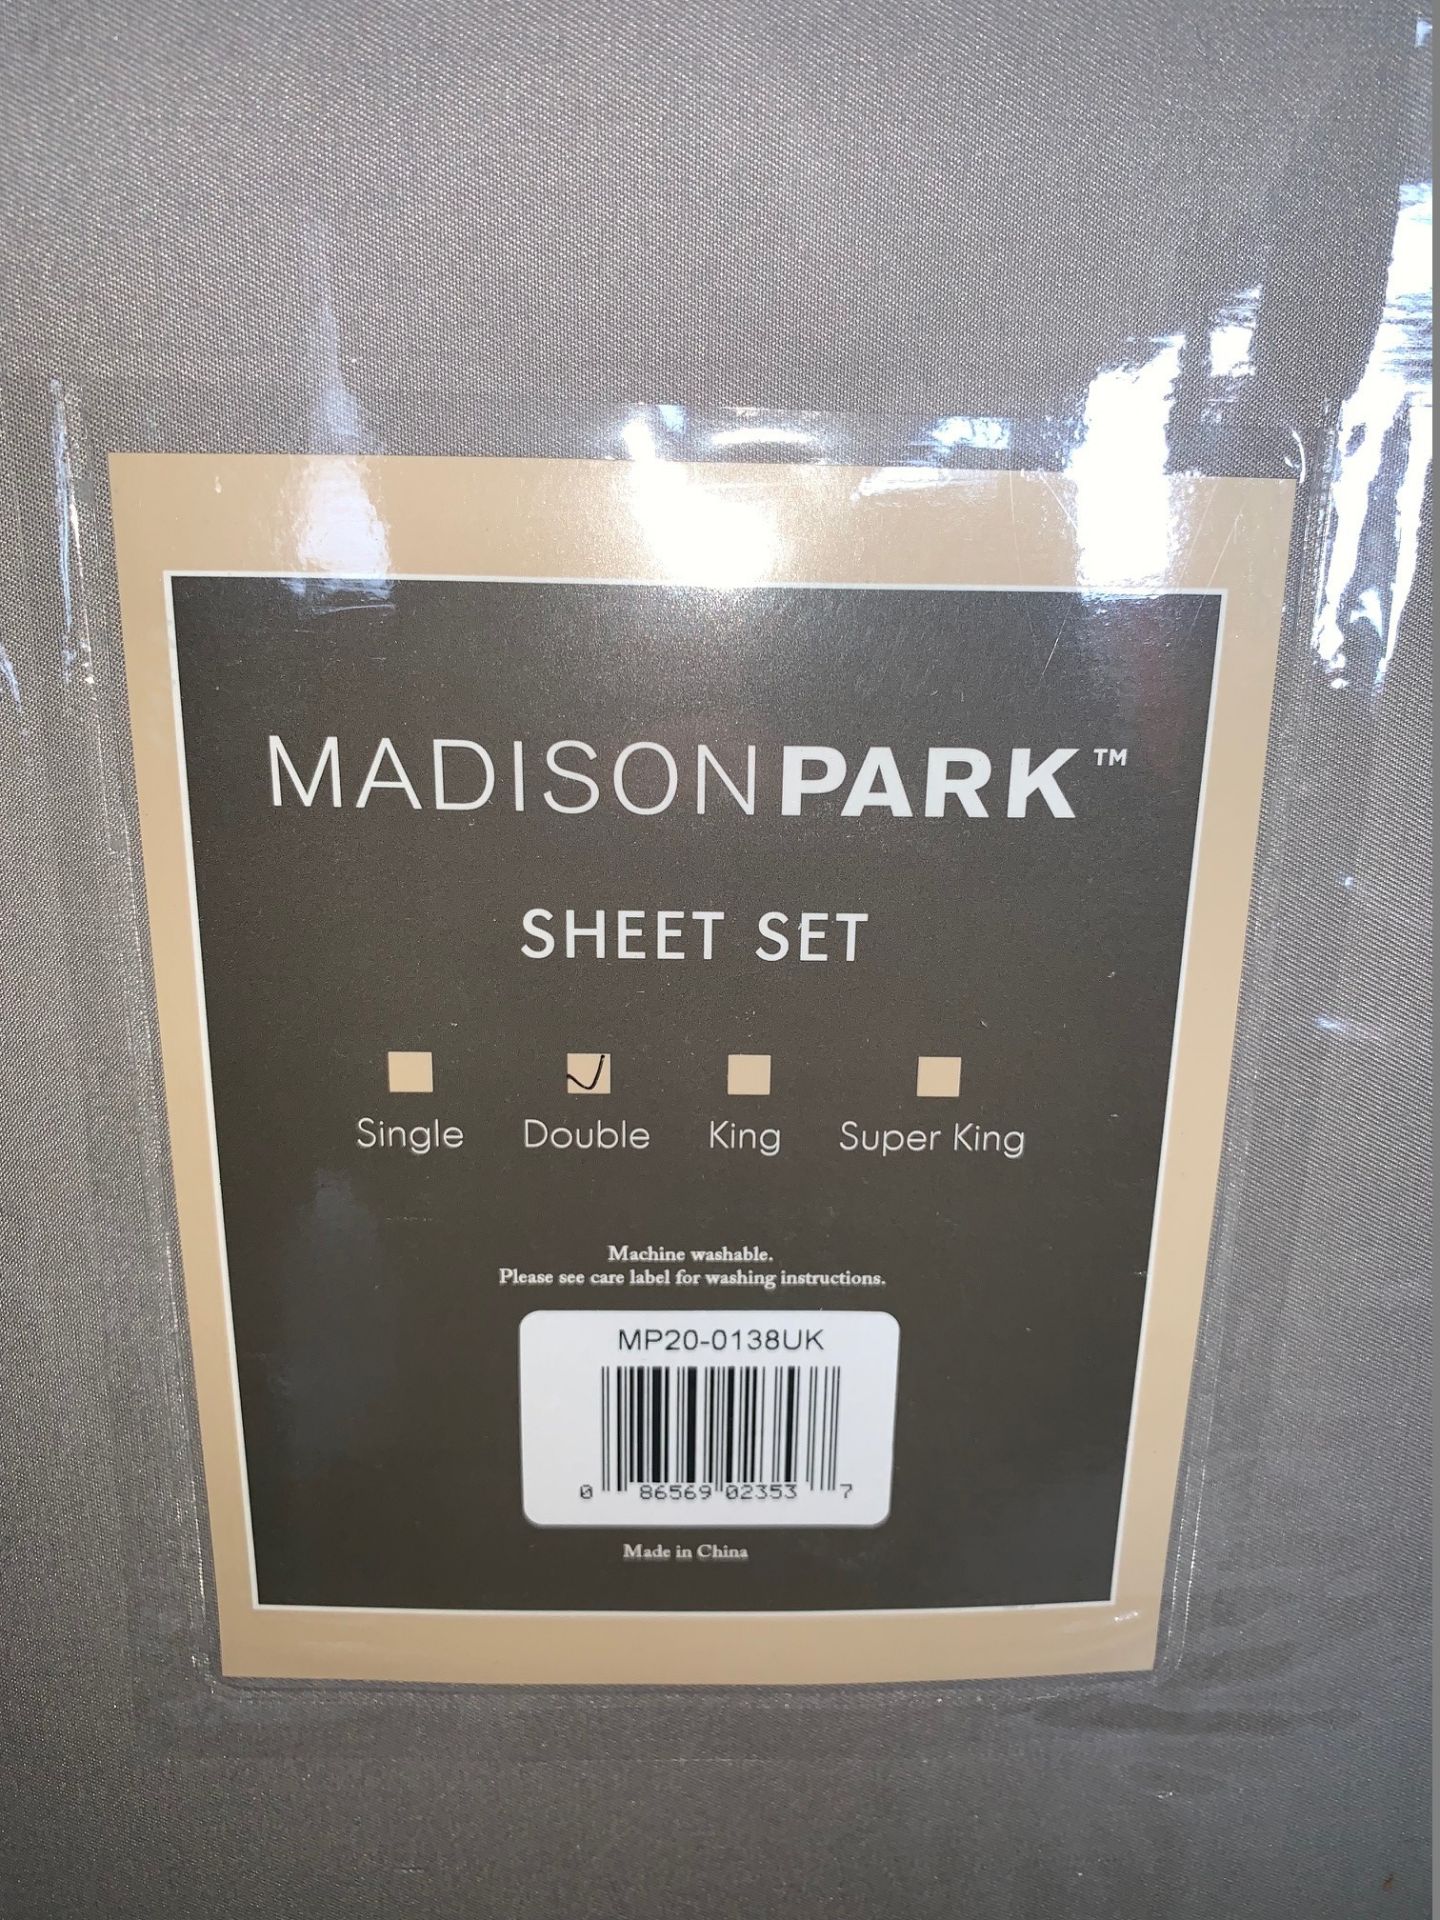 1 x Madison Park Double Sheet Set Grey - Includes Fitted Sheet, Flat Sheet and Pillowcases - Product - Image 2 of 2